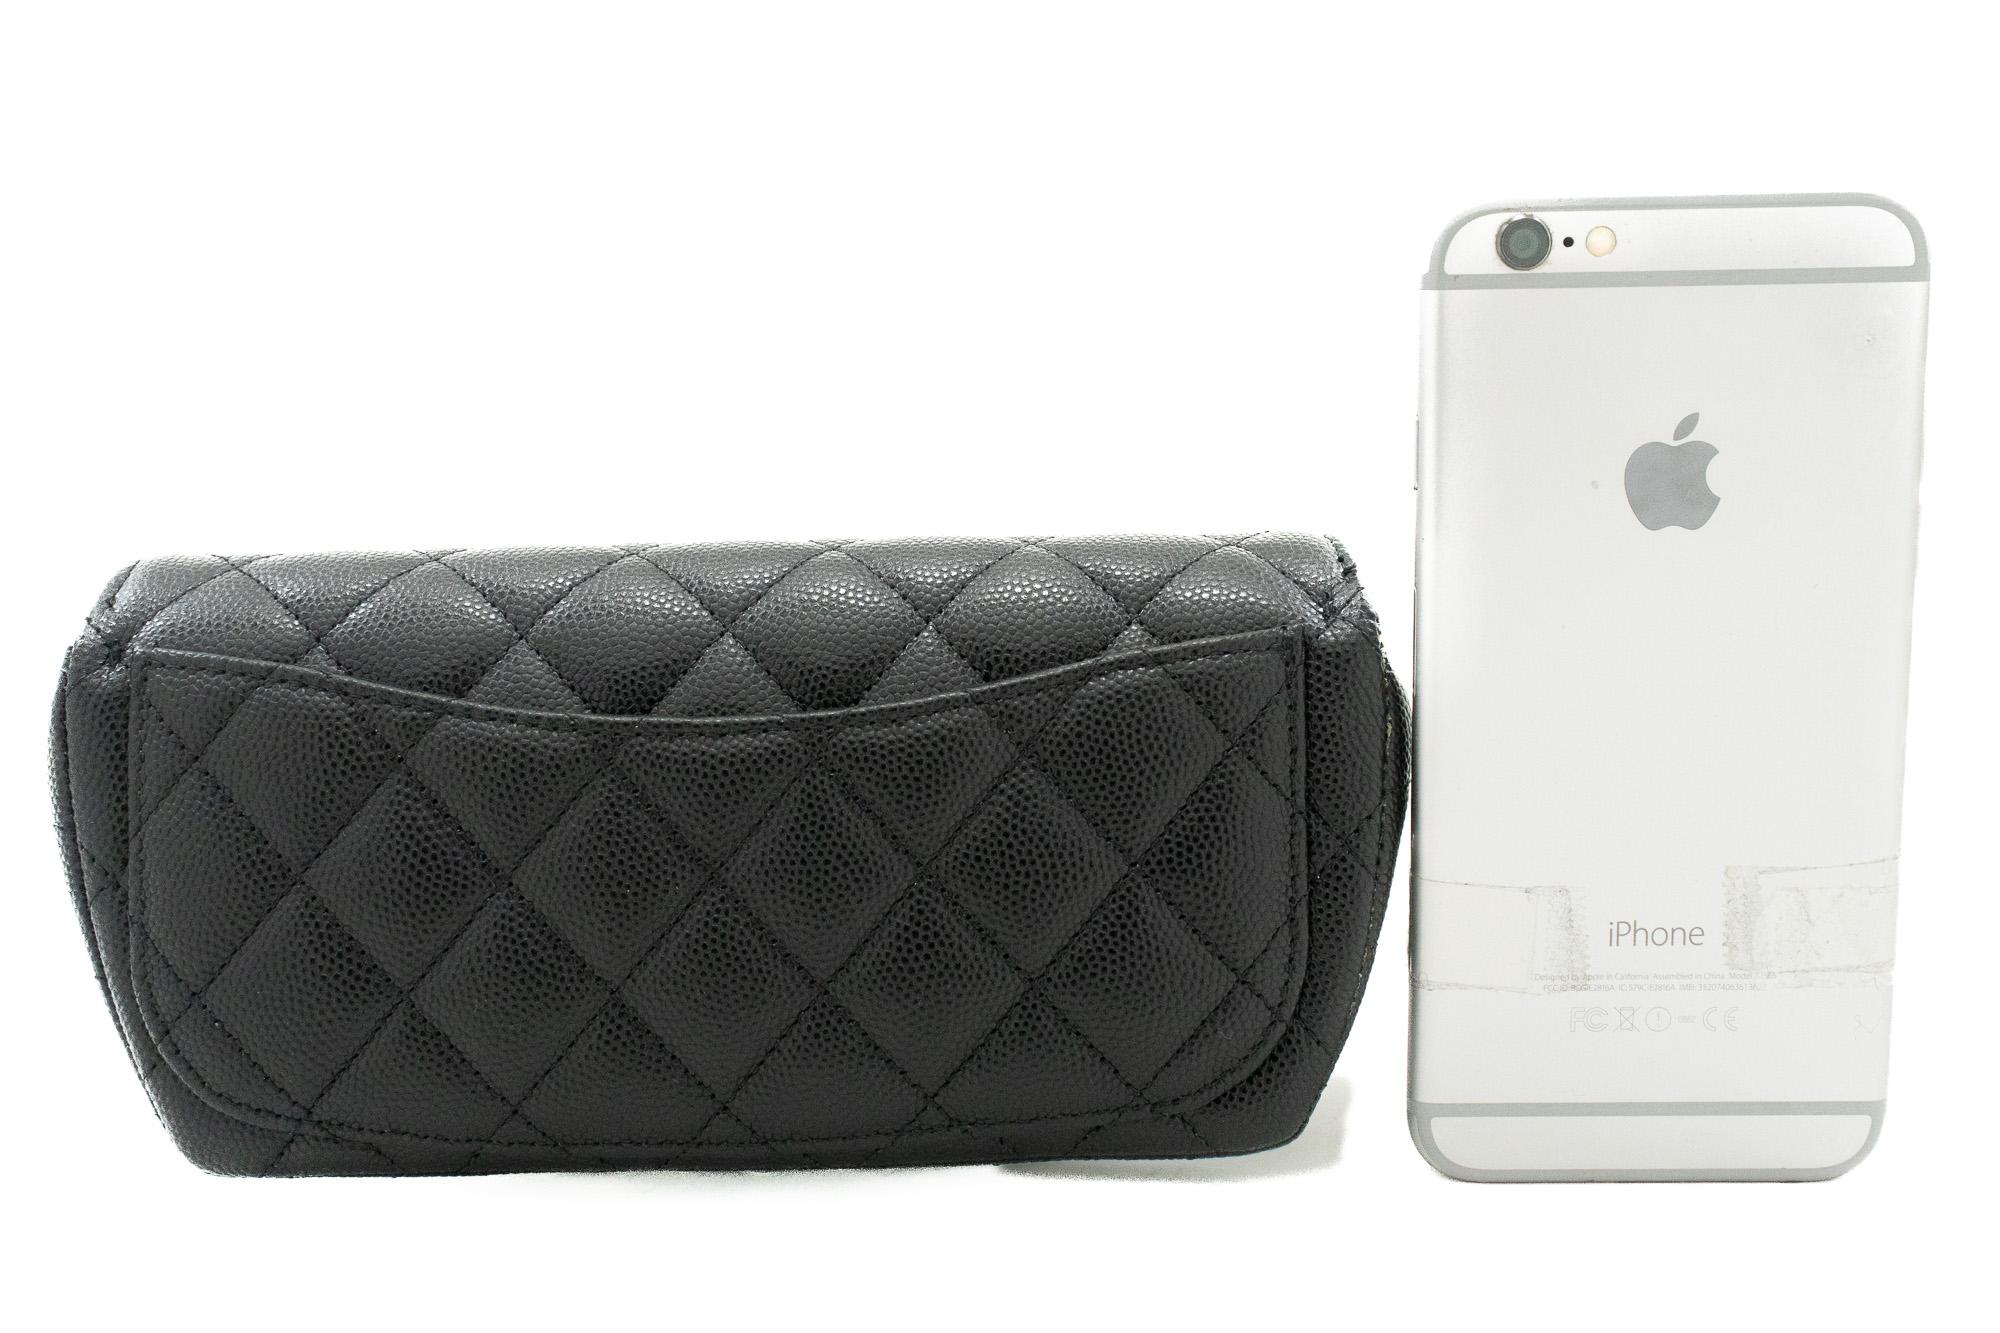 CHANEL Flap Phone Holder With Chain Bag Black Crossbody Clutch In Excellent Condition For Sale In Takamatsu-shi, JP